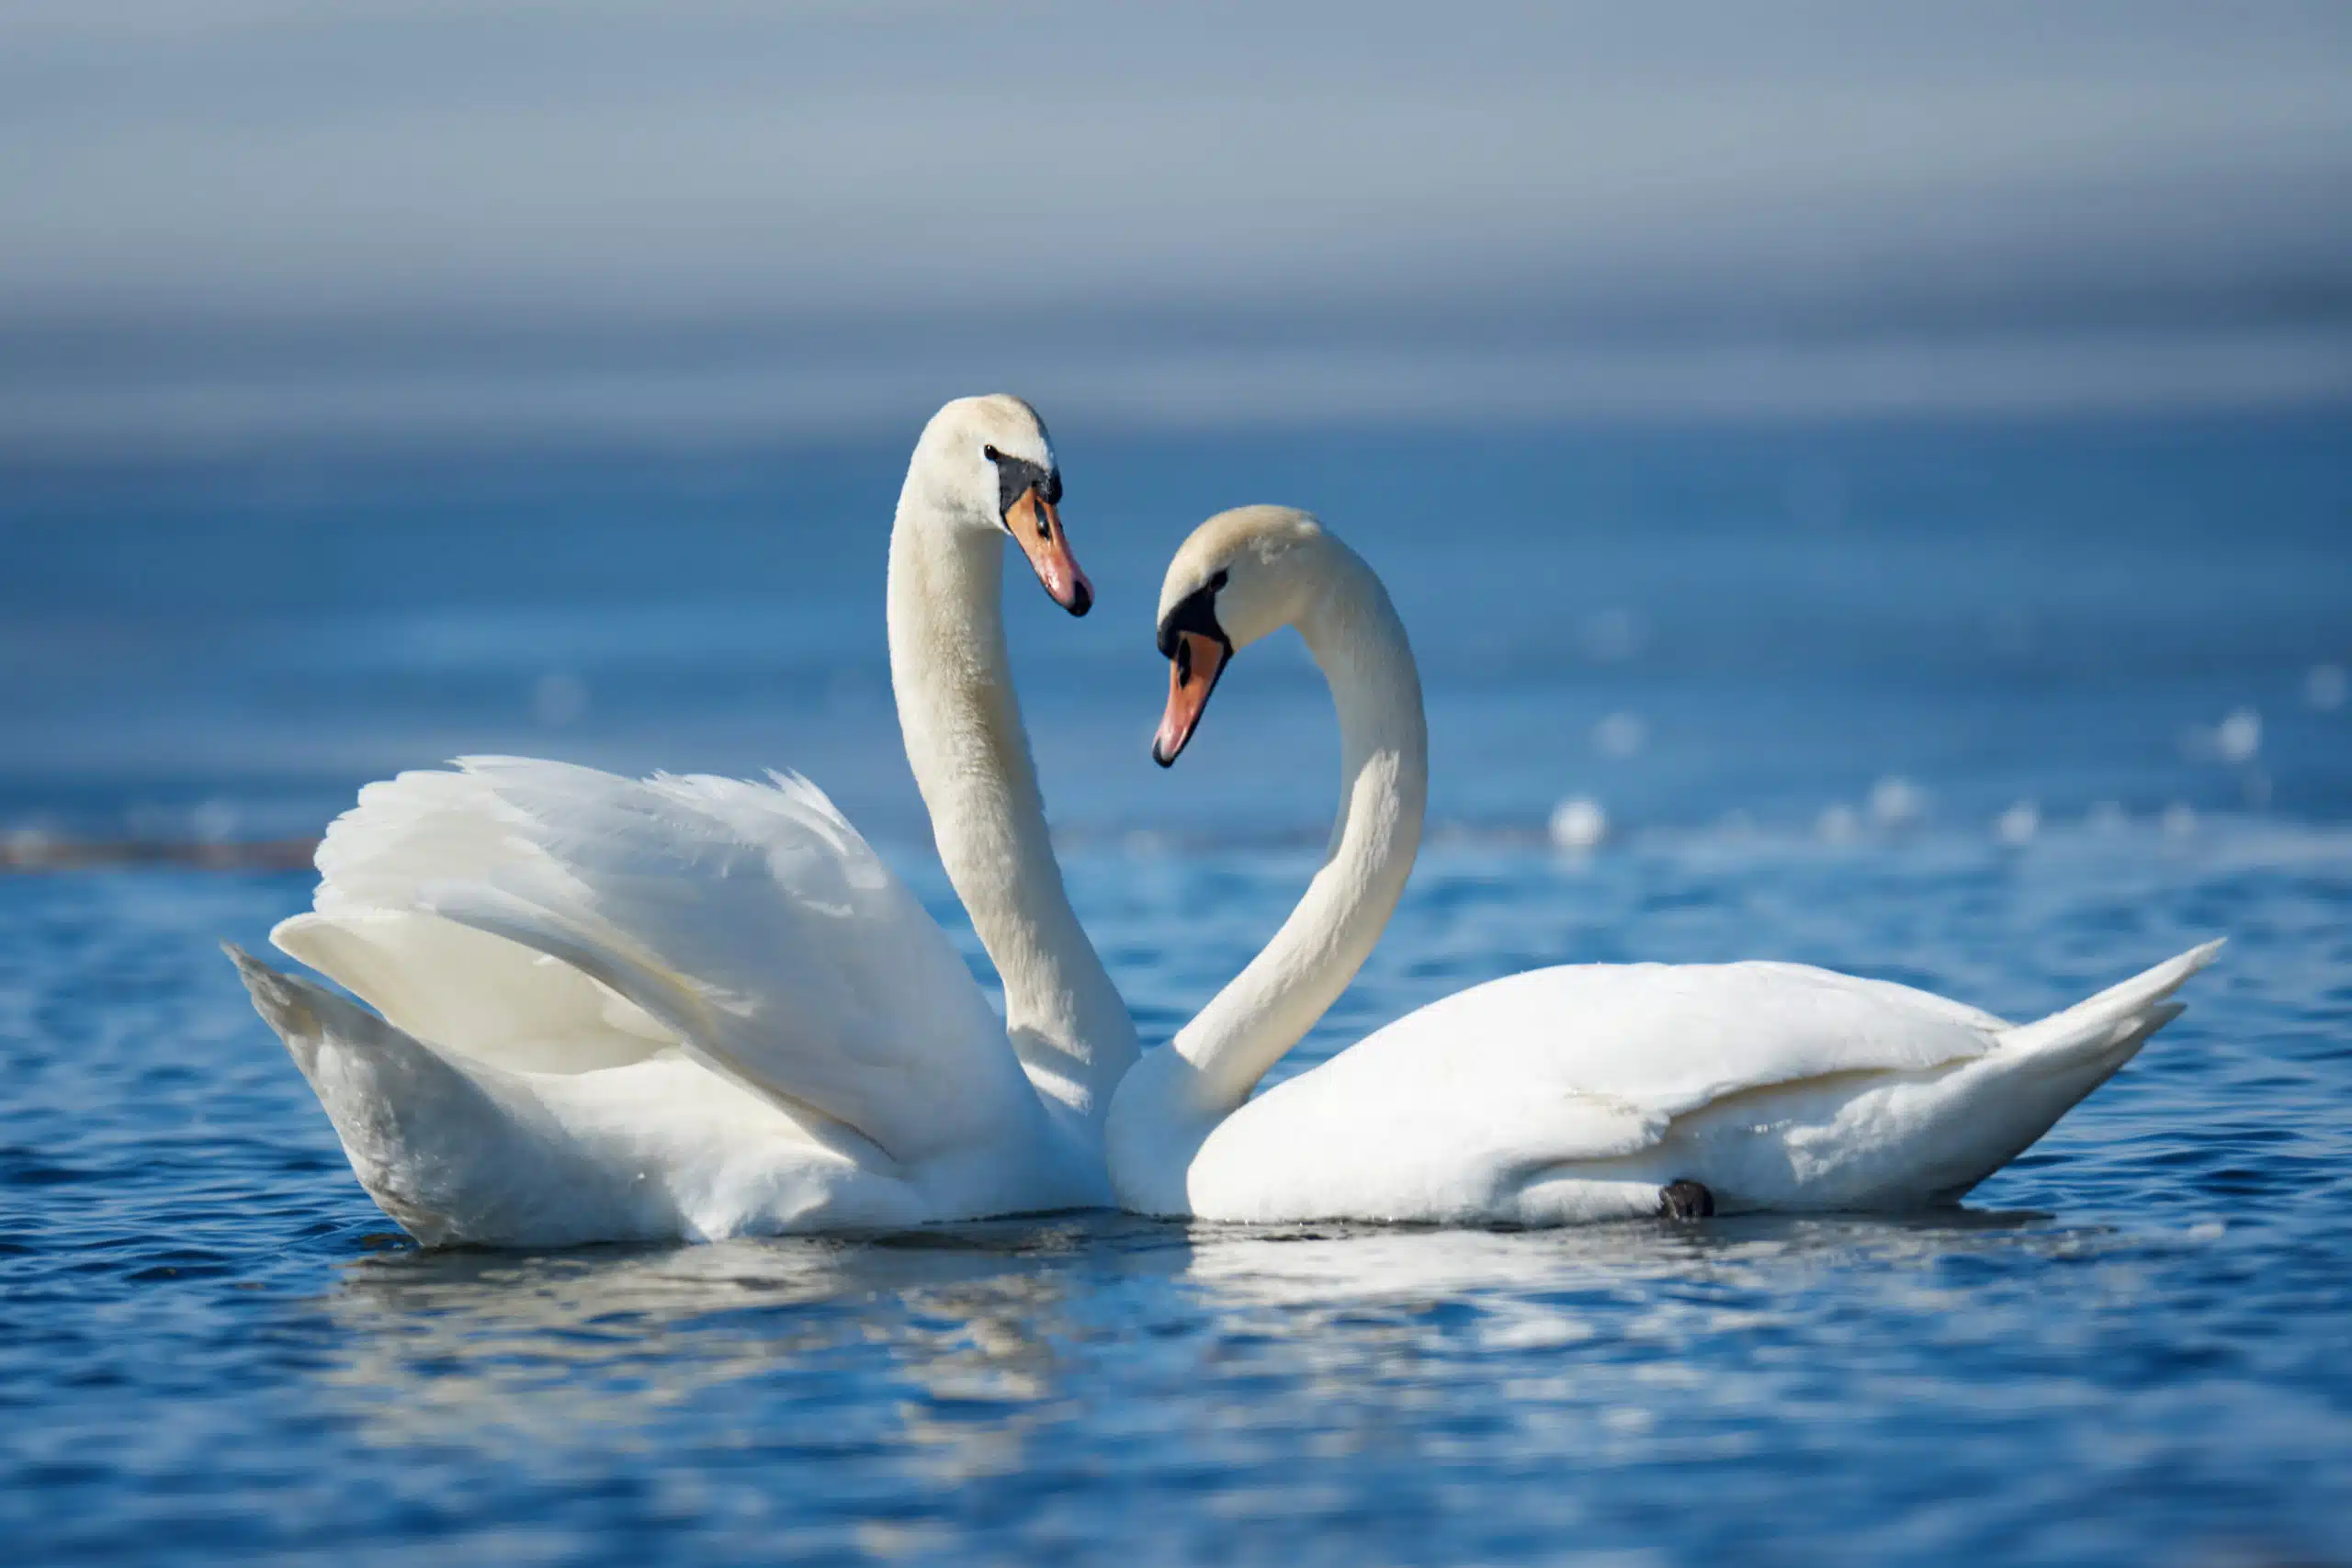 Romantic two swans on the lake, symbol of love